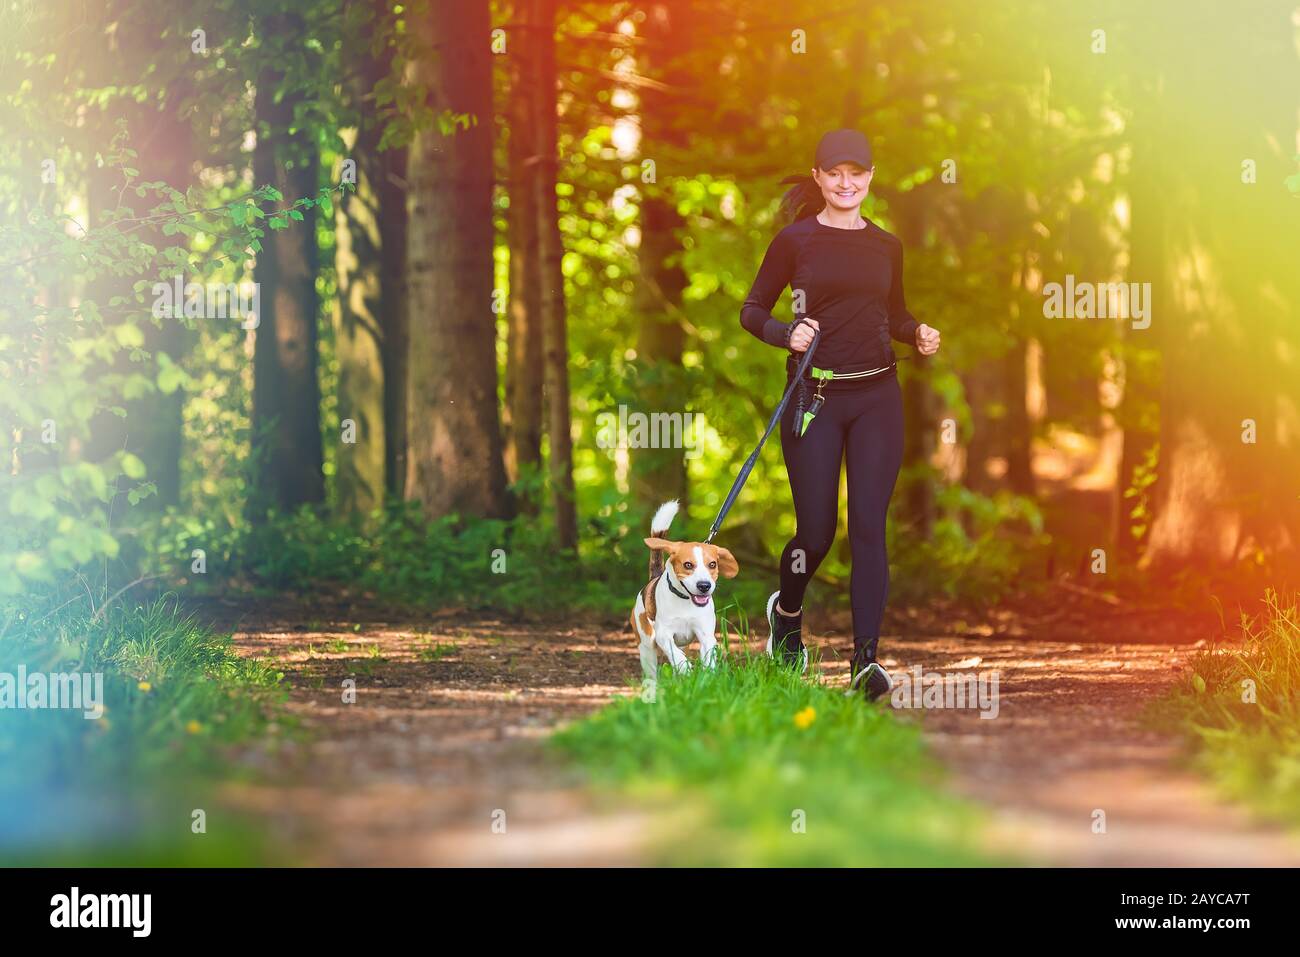 Girl is running with a dog (Beagle) on a leash in the spring time, sunny day in forest Stock Photo